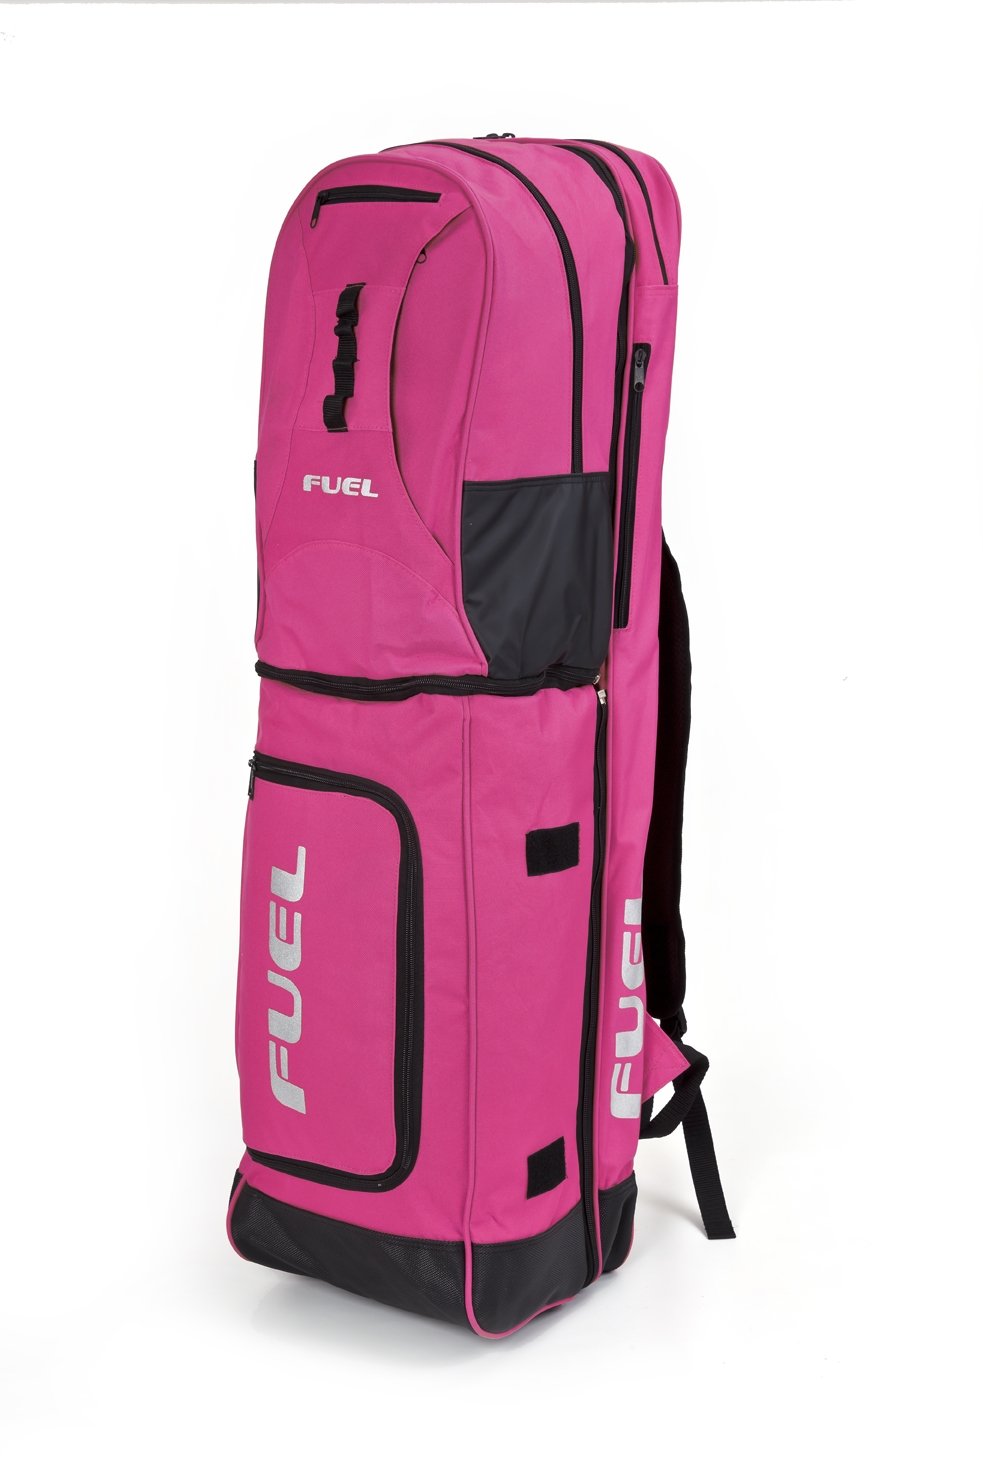 FUEL 3 in 1 Stick Bag - The Jerry Can MK1